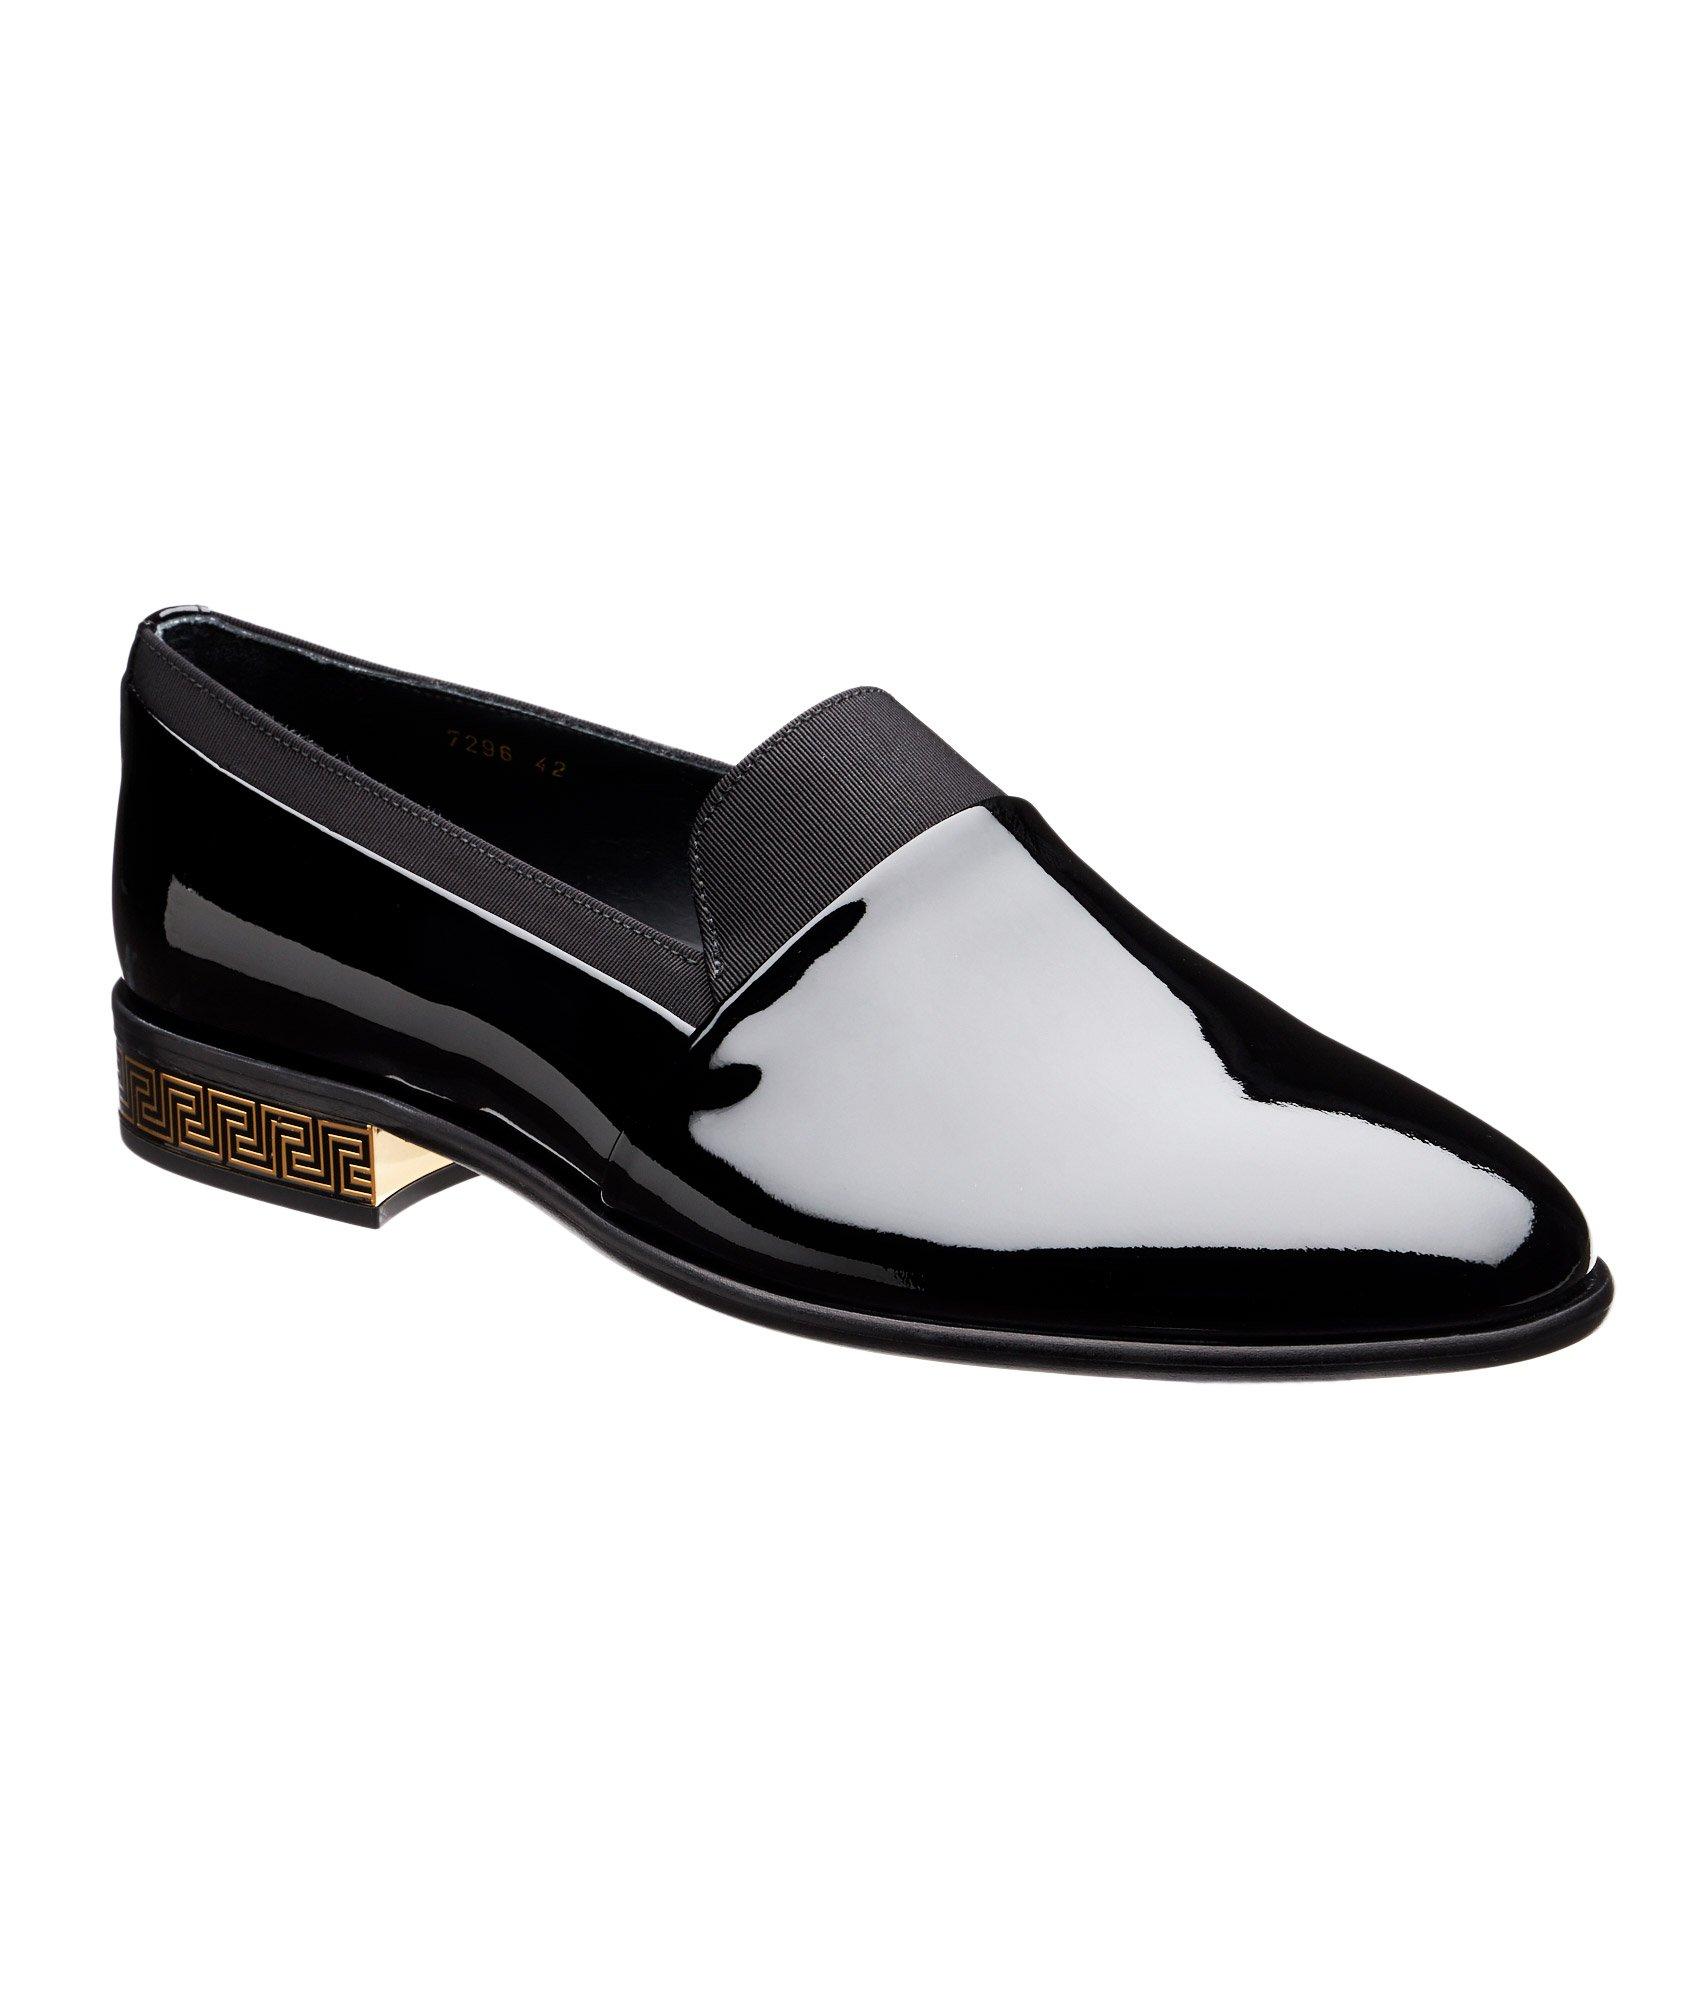 versace patent leather shoes